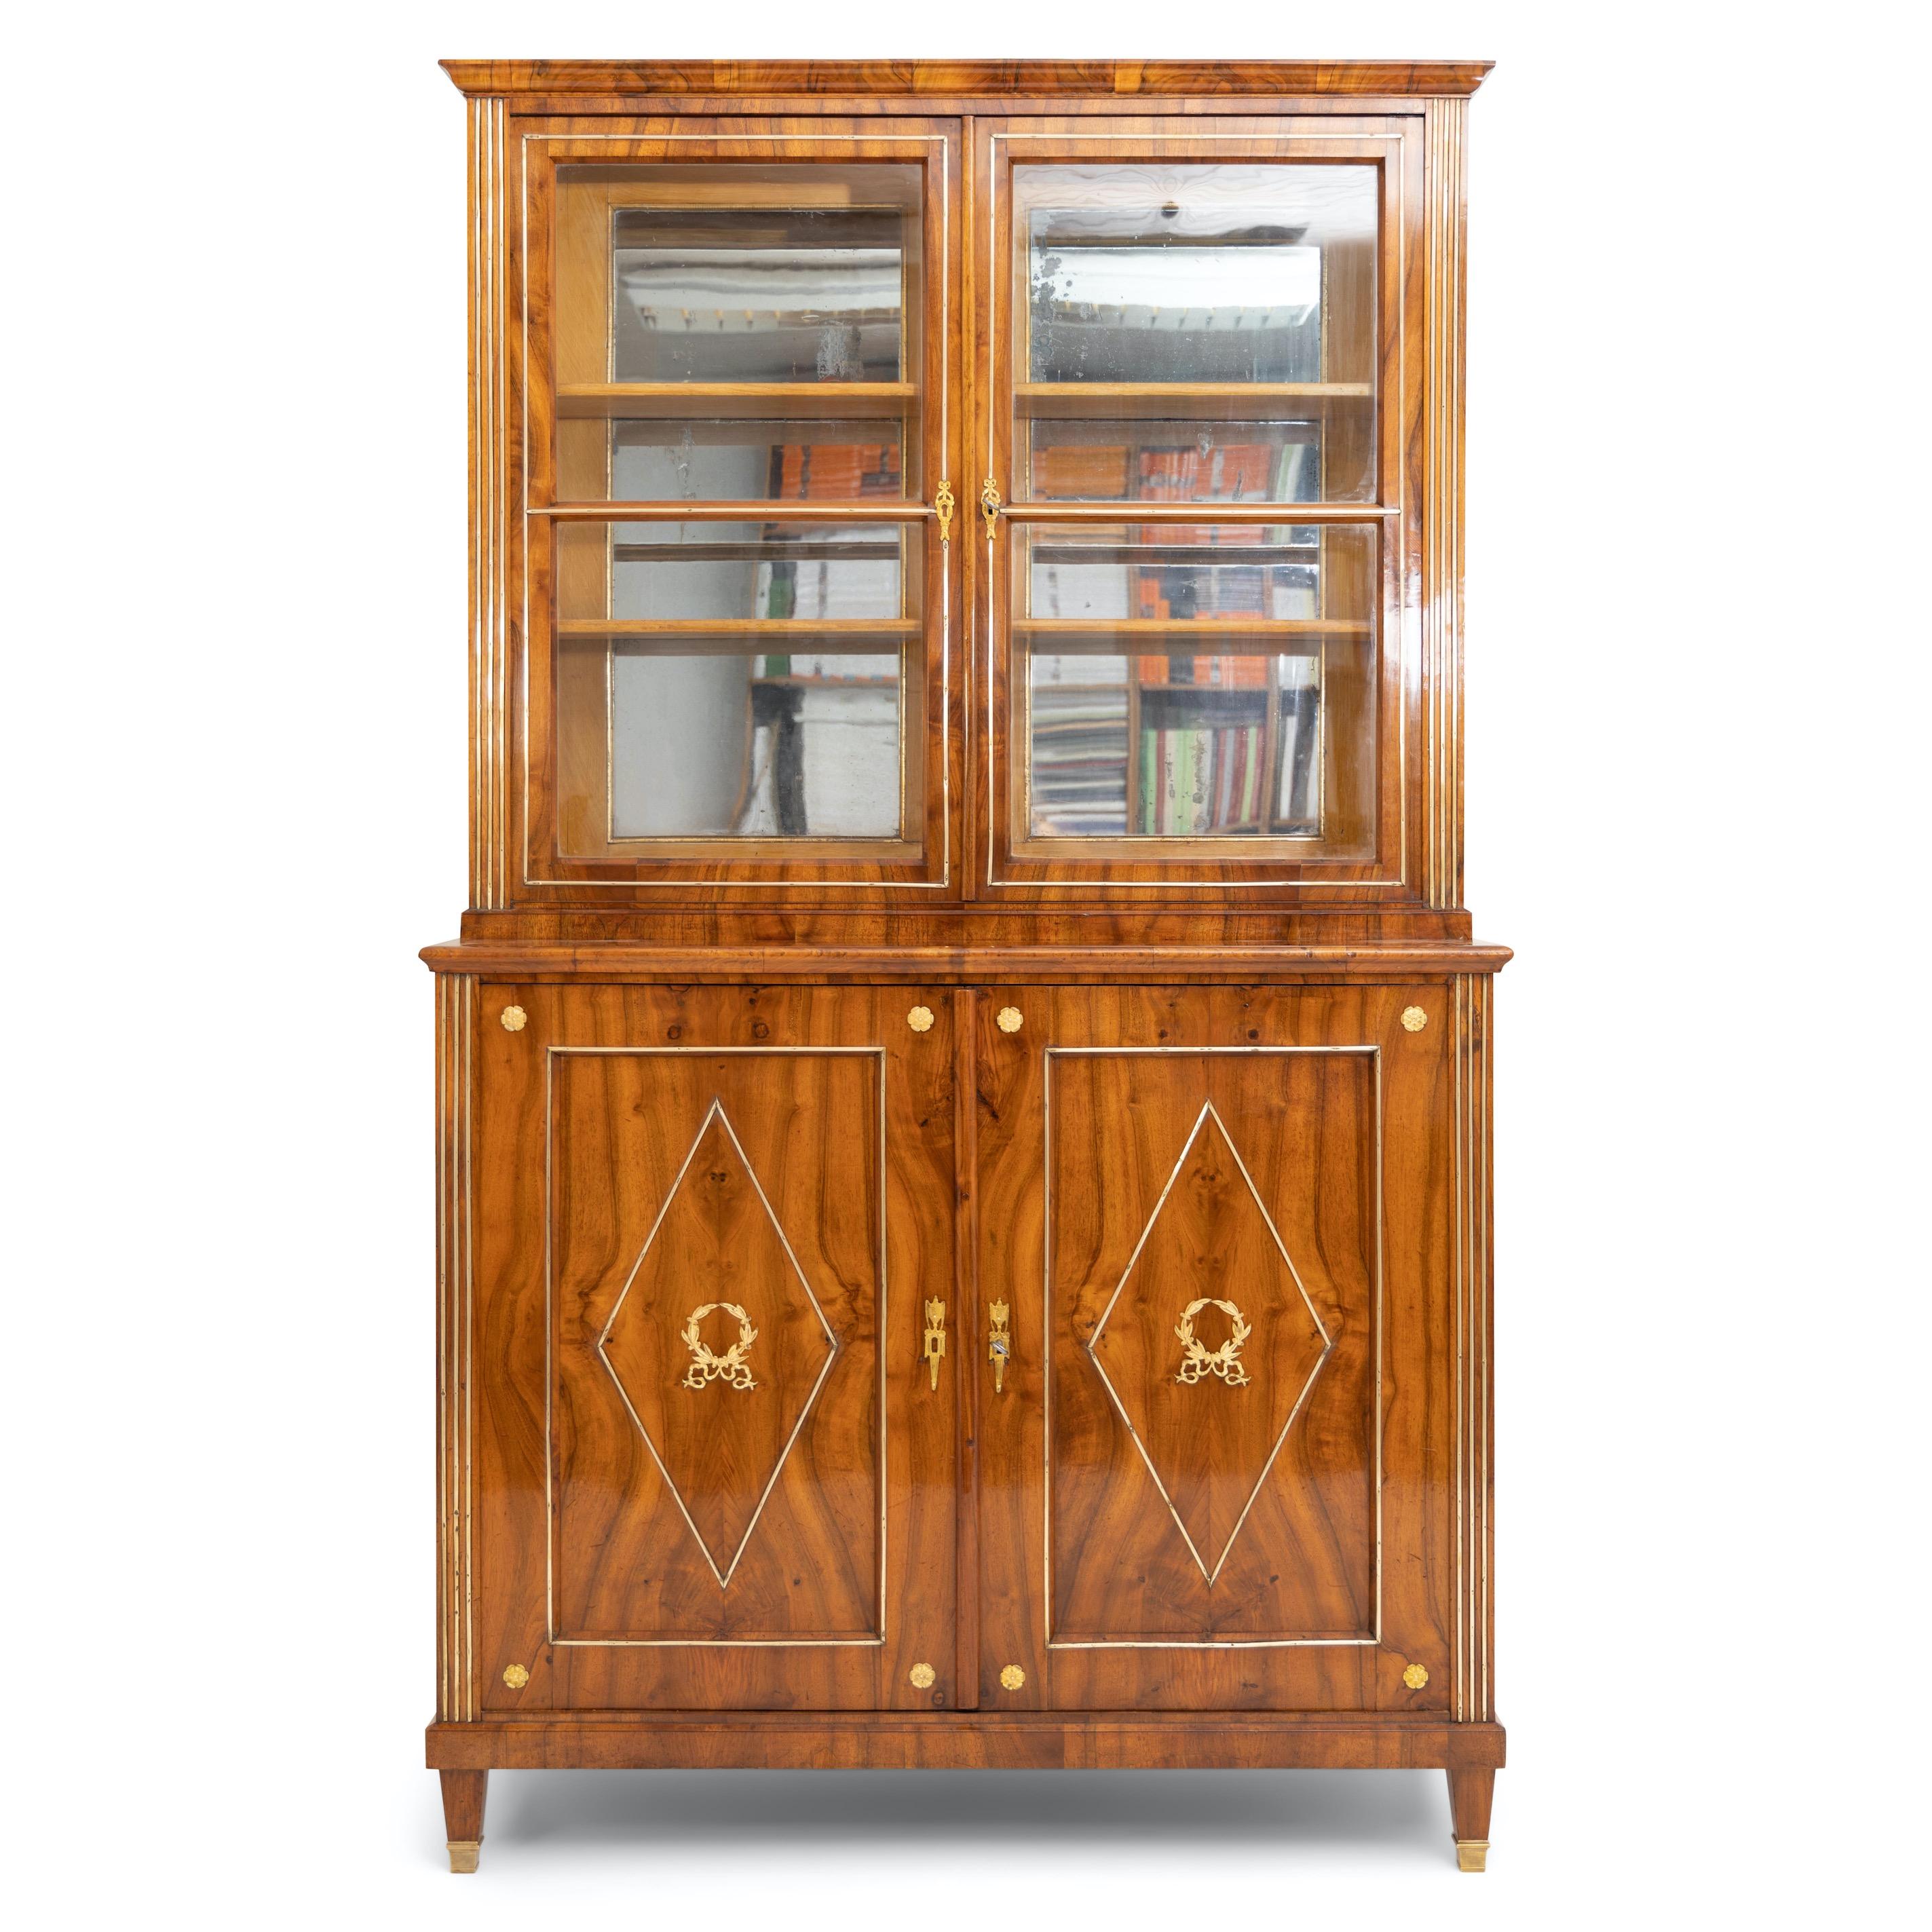 French Empire display cabinet standing on square pointed feet with brass sabots, veneered in walnut. The four-door corpus is decorated with fluted corners with brass profiles, rosettes, and wreaths with ribbon decoration on the filling panels. The